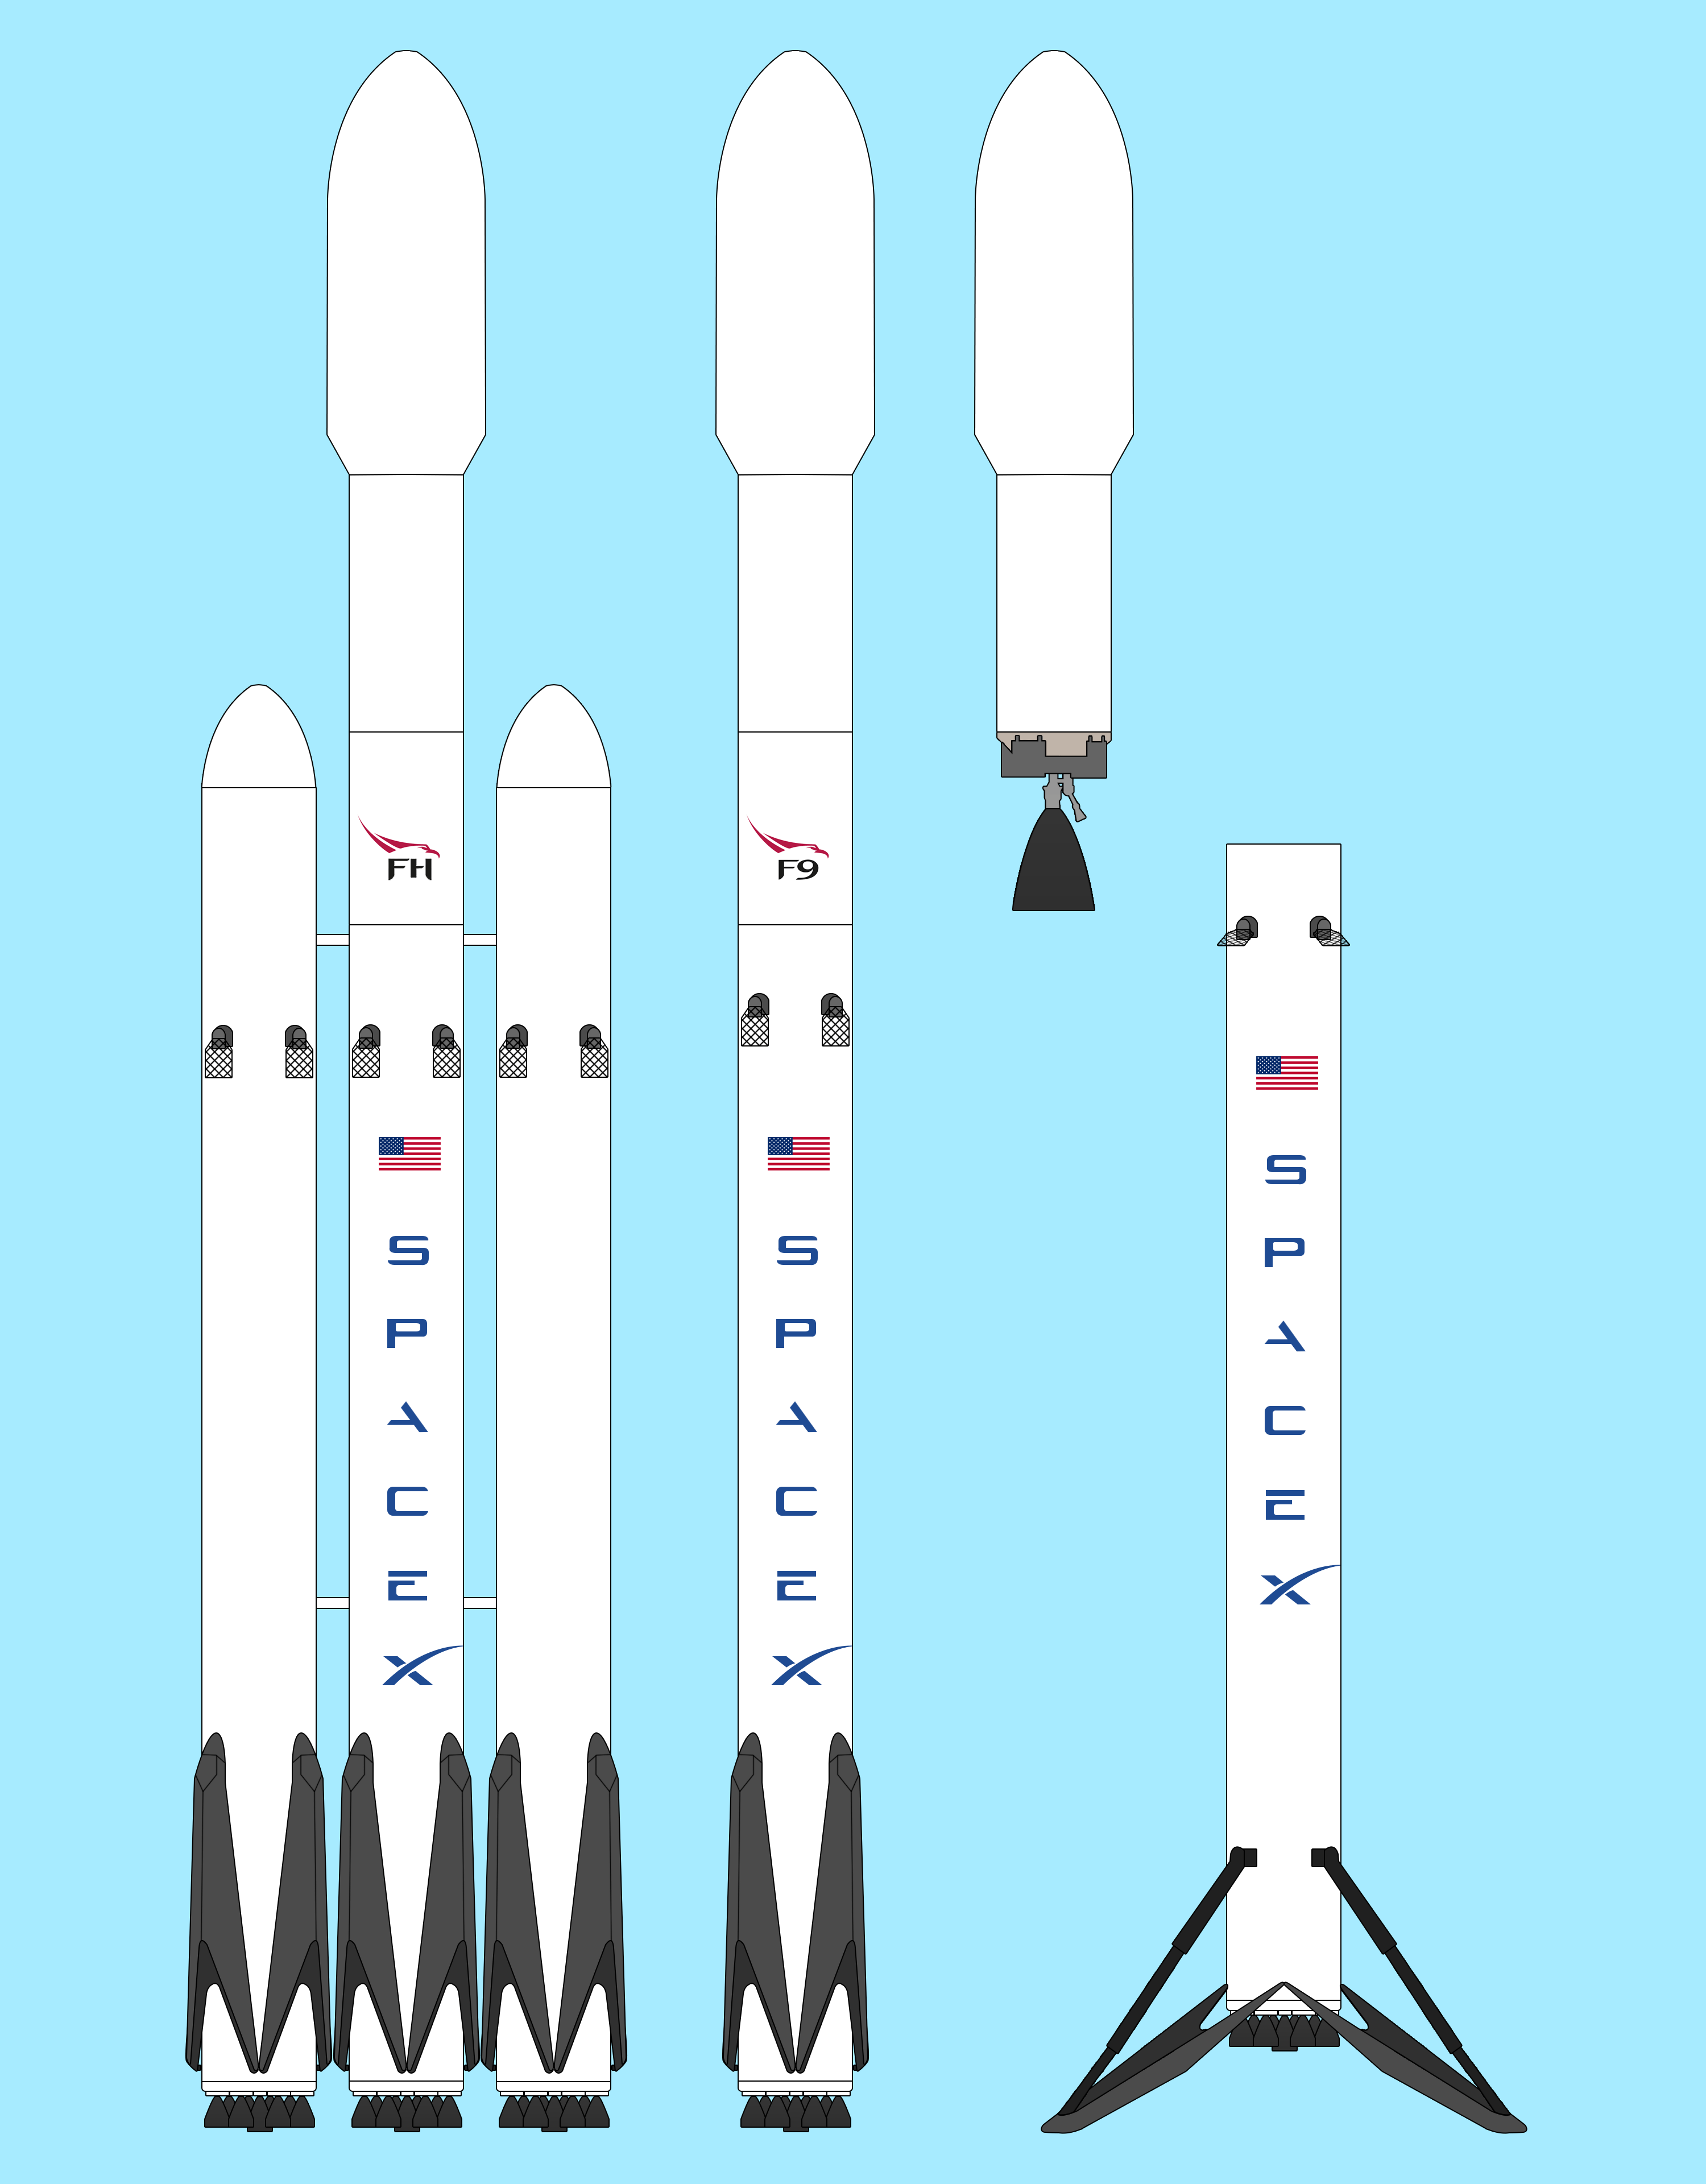 SpaceX Falcon 9 Heavy Logo - I made some mostly accurate, high quality images of Falcon 9 & Heavy ...